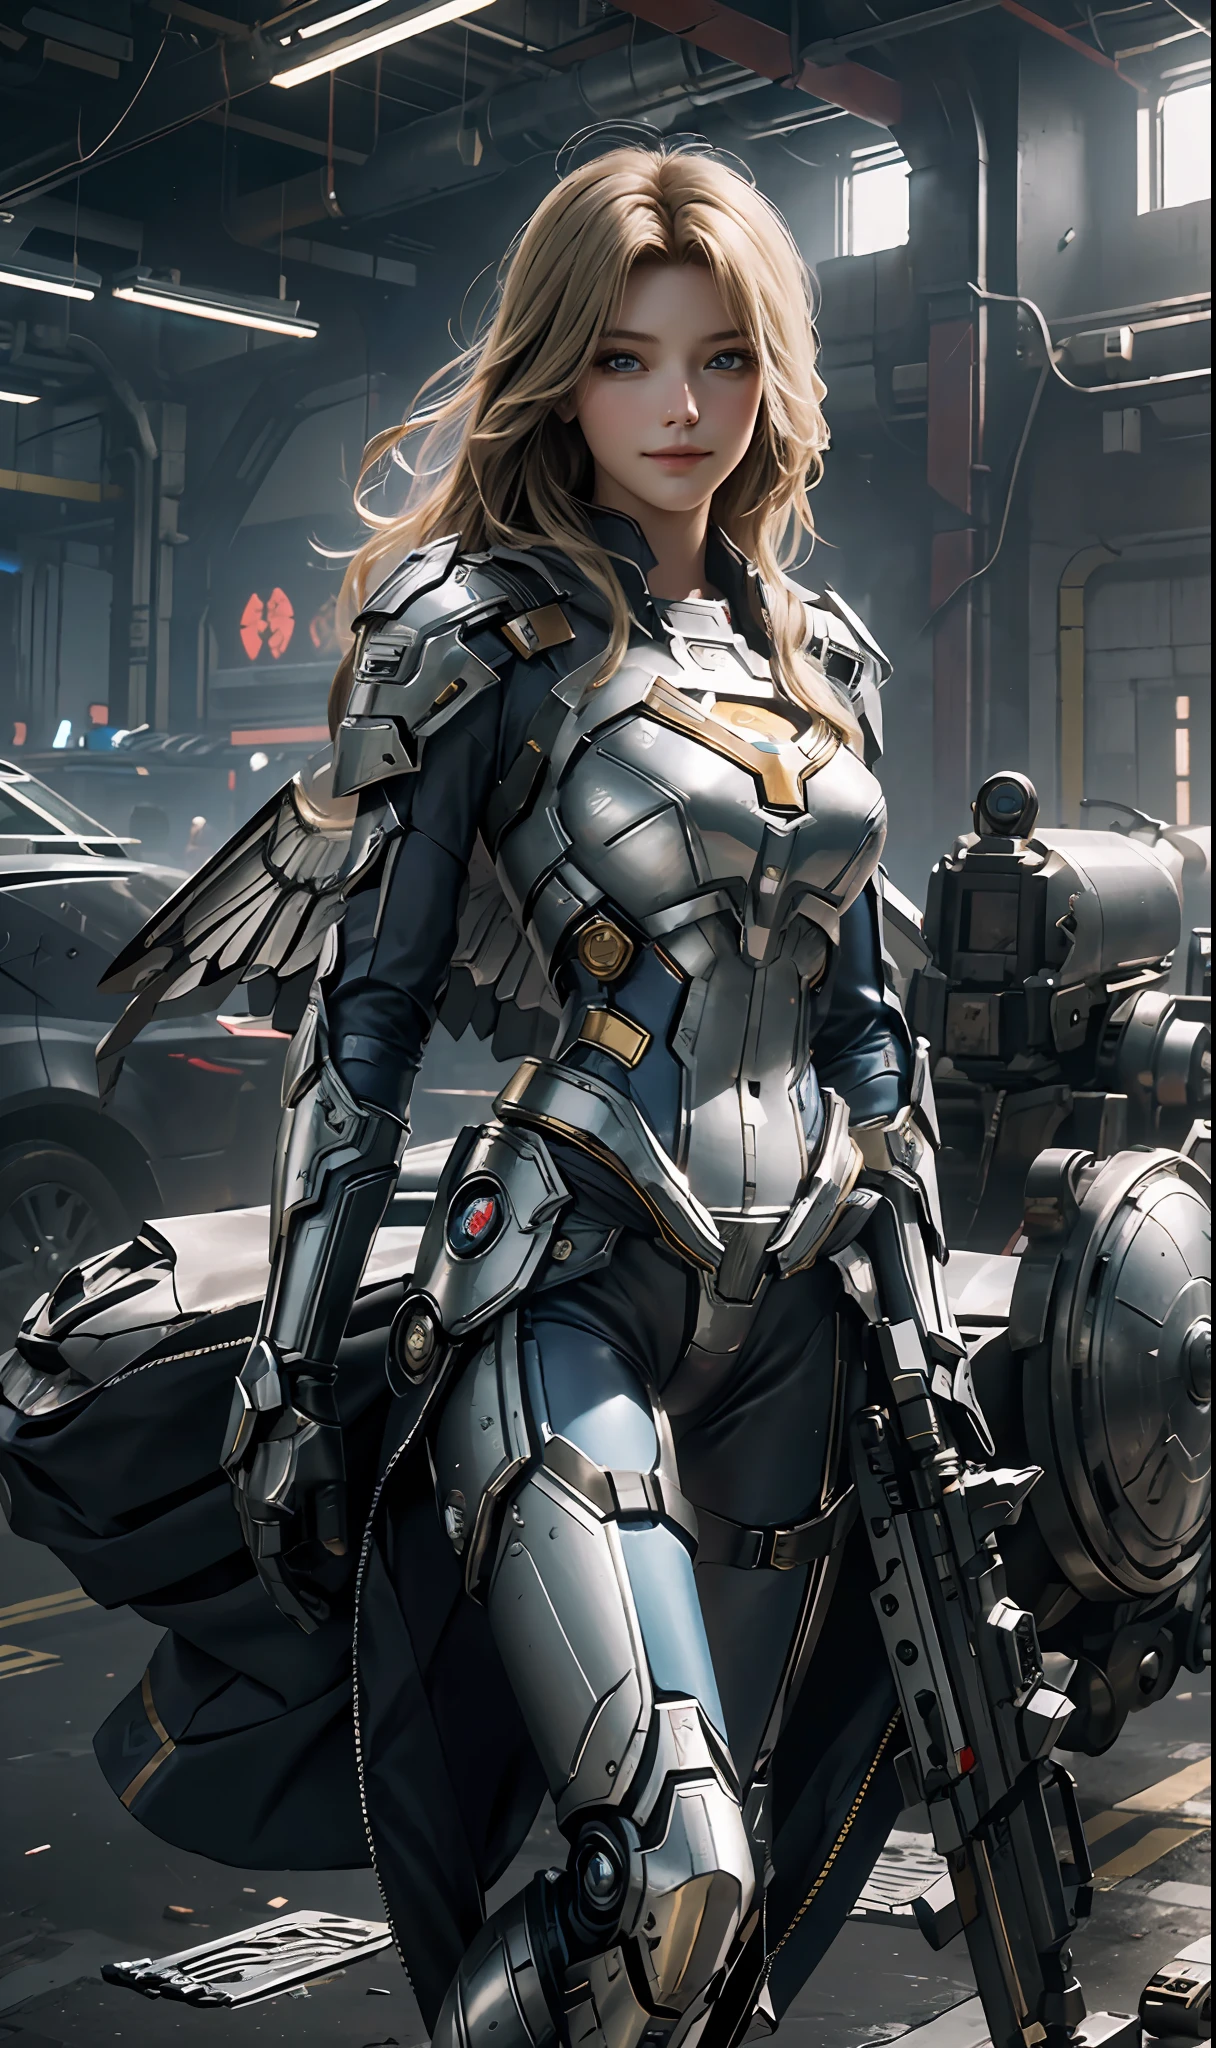 Supergirl masterpiece, (best quality), highly detailed, ultra-detailed, 1supergirl, (mechanicalwings: golden, glowingeyes: blue, silverarmor: 1.2, elongated ears: 0.8), (cyberpunkcity: 1.5, weapon: energyblade), (fantasylandscape: 1.2, natural lighting: 1.5, confidentexpression), (panorama: 1.2), blonde, with superman symbol S on the chest, mecha, smile, blue eyes, angle, angels, wings,